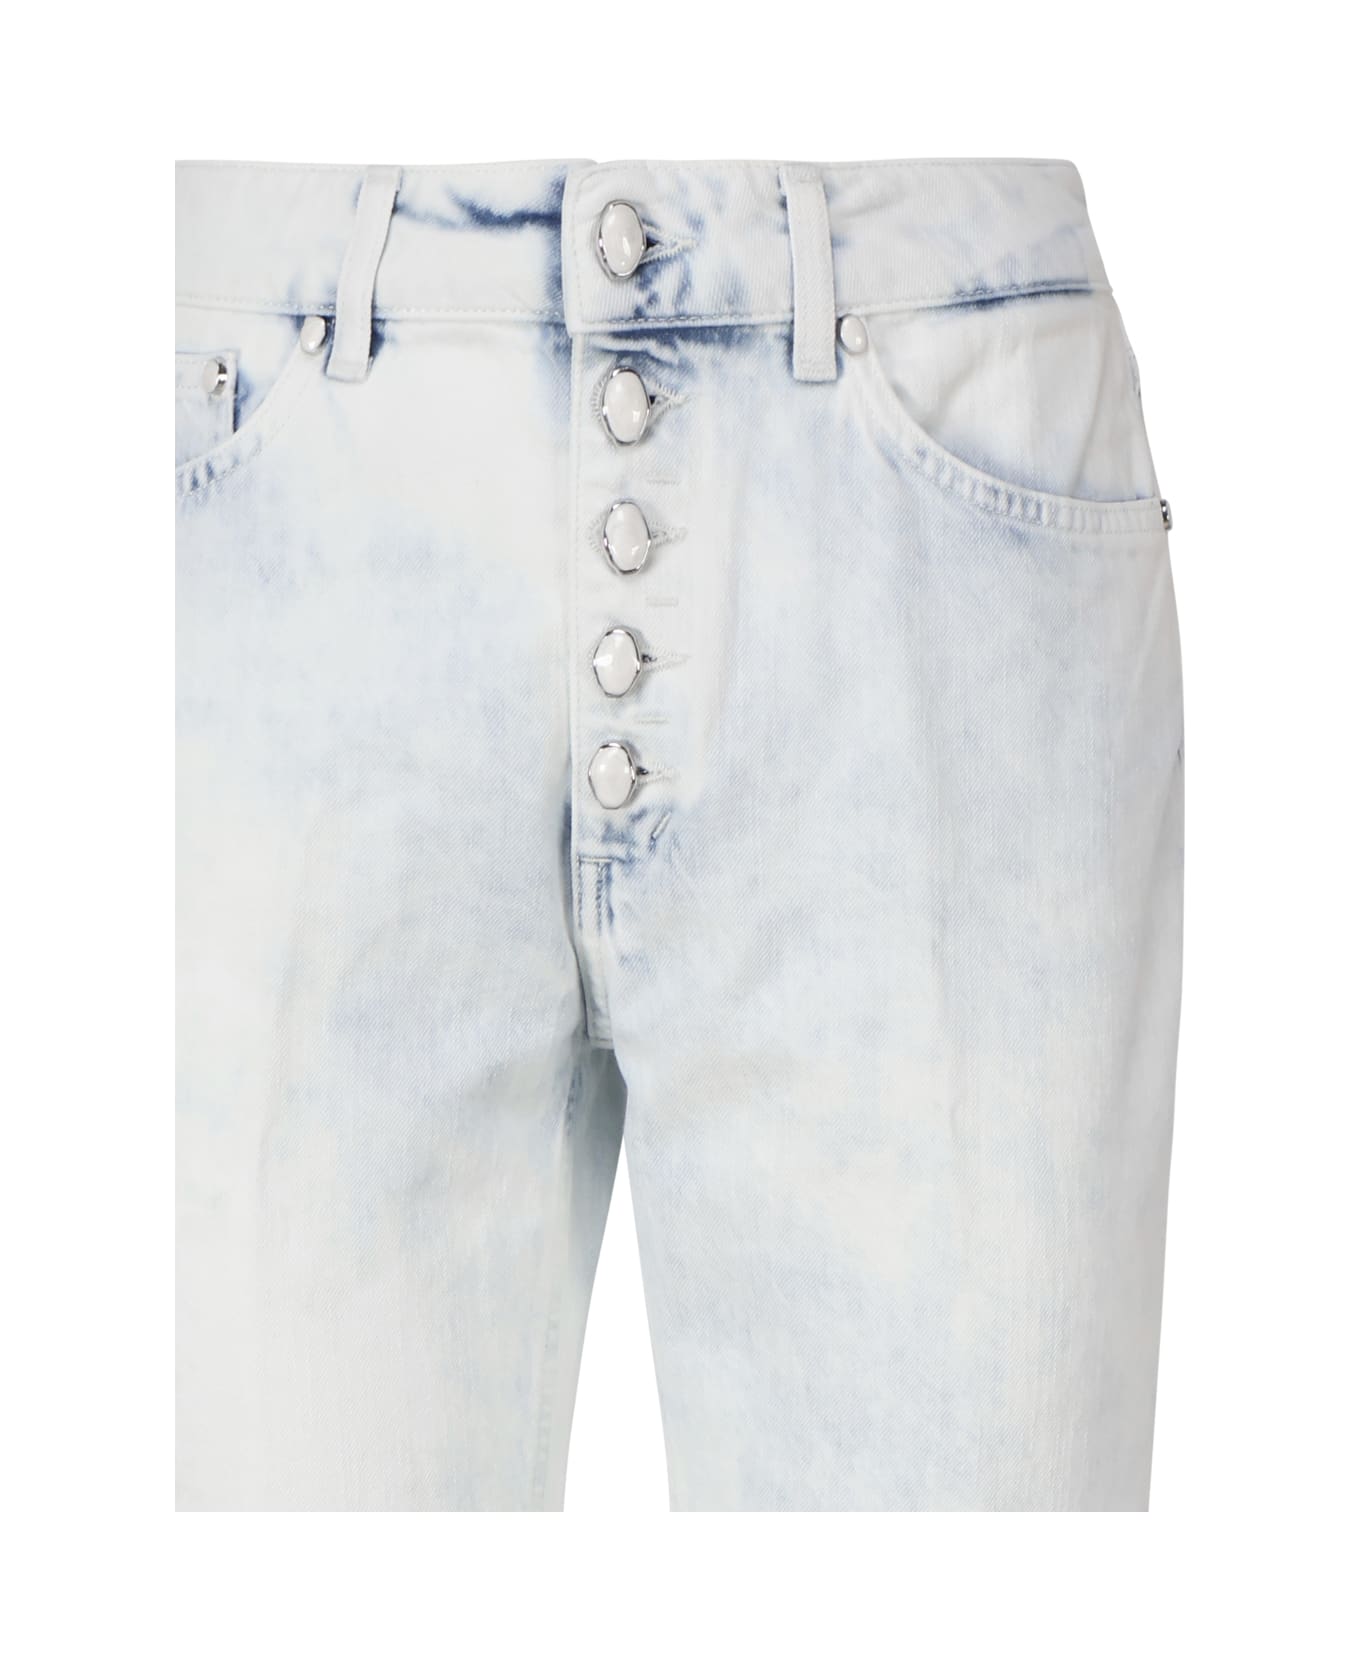 Dondup Koons Loose Jeans In Bull Stretch - White デニム